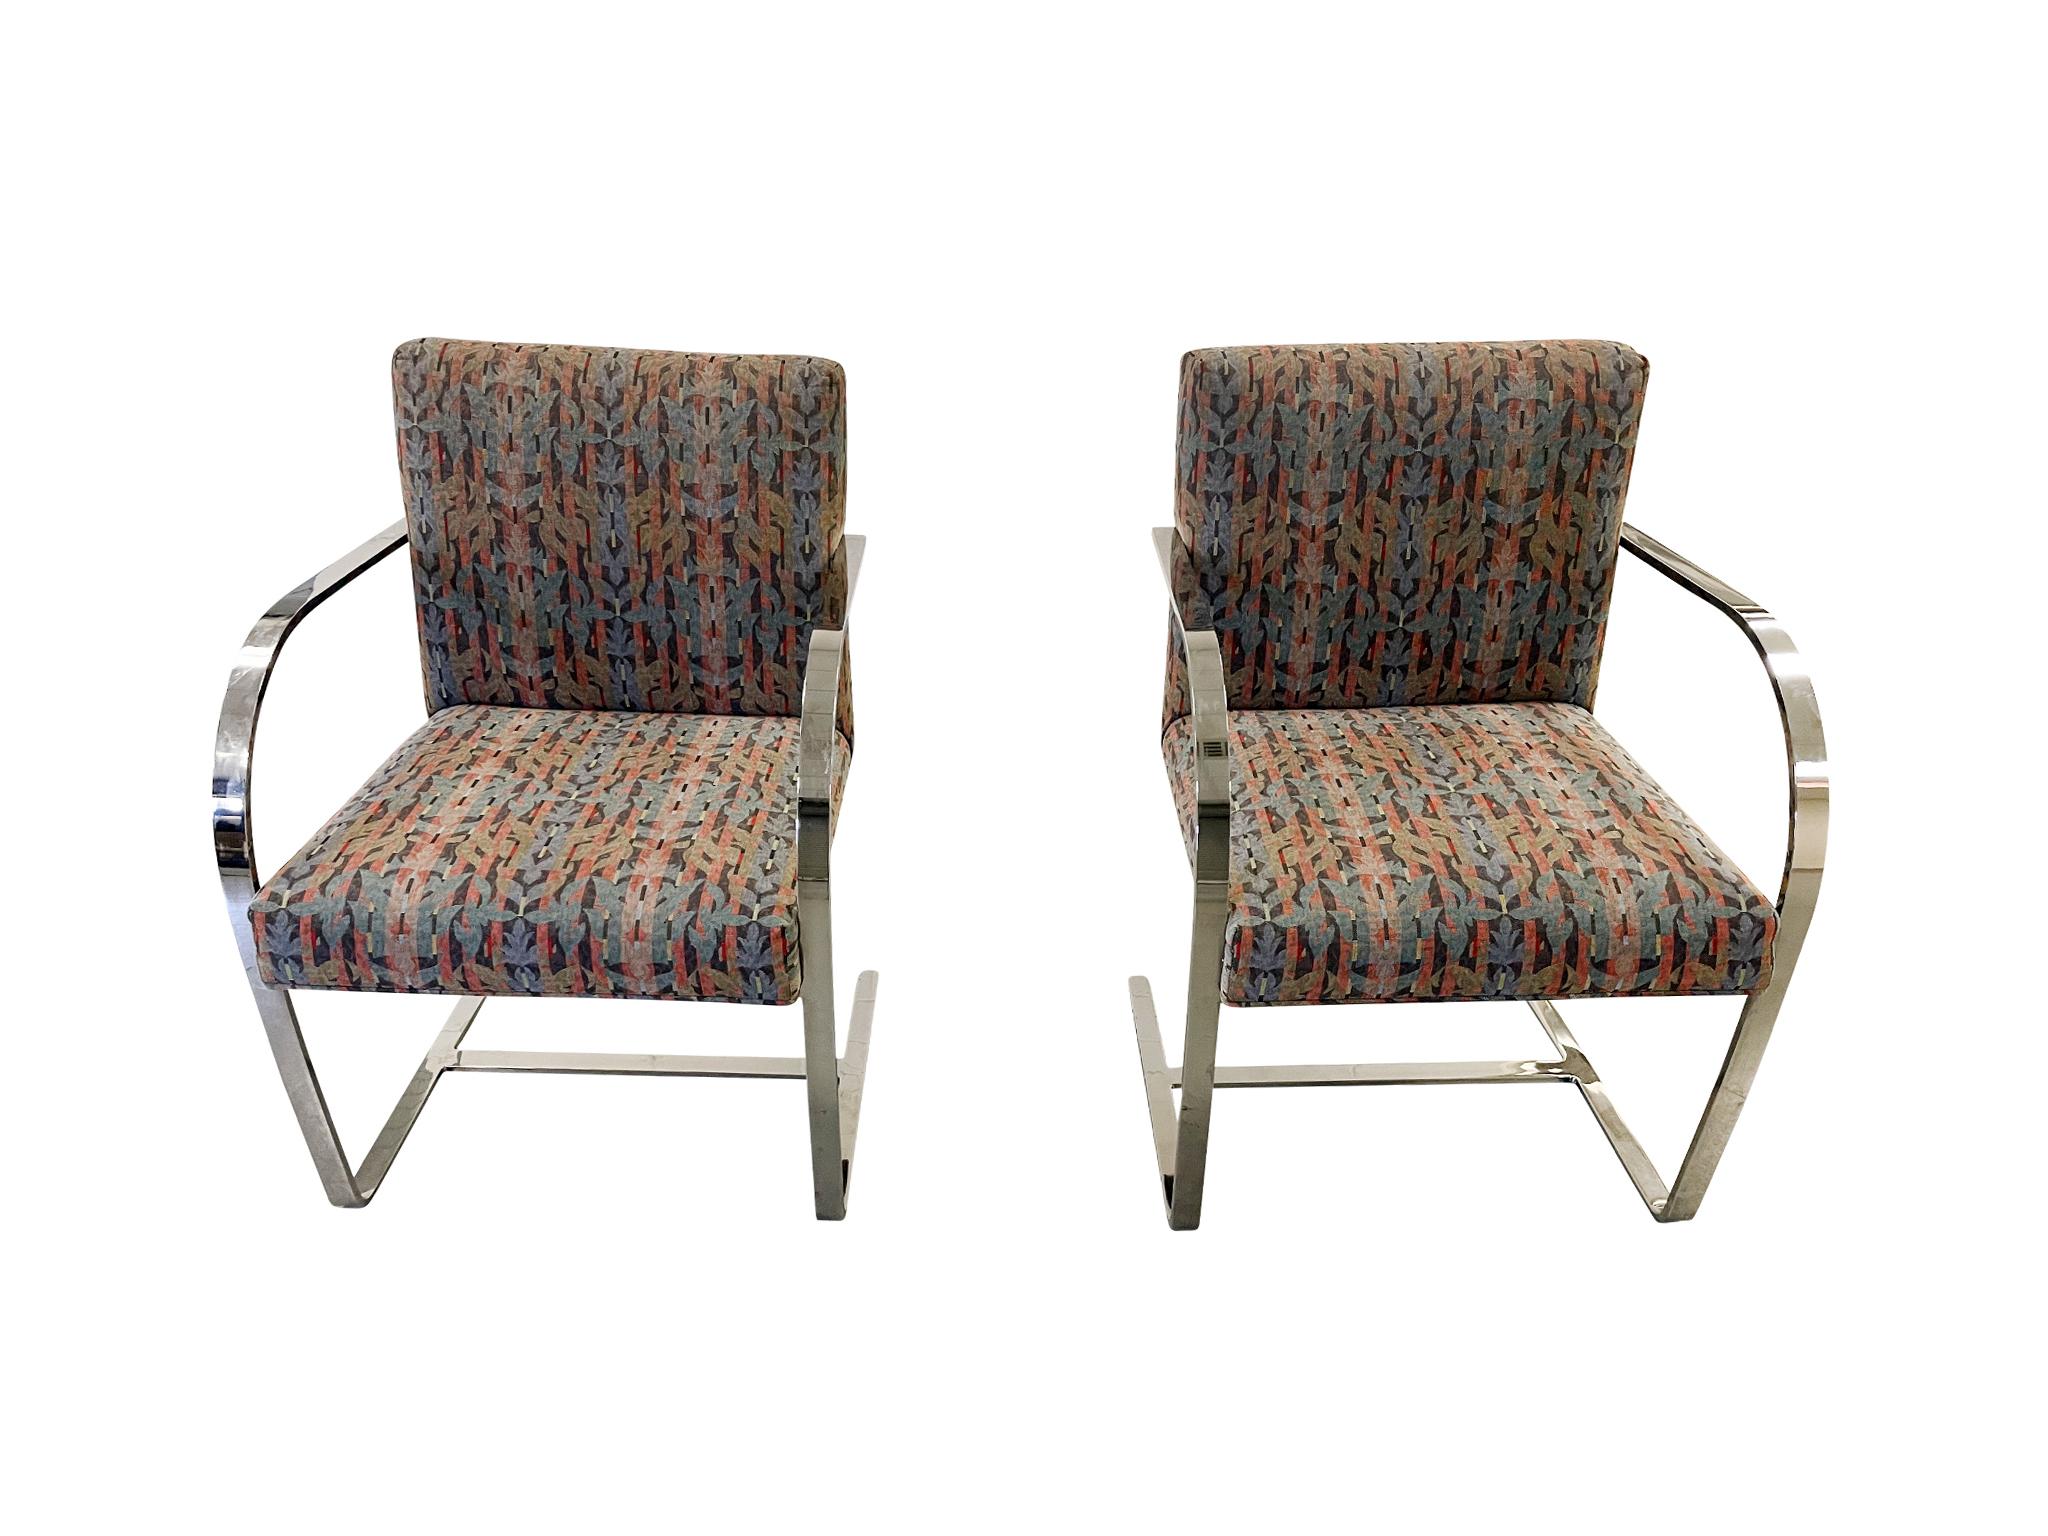 Set consisting of 6 chrome armchairs attributed to Ludwig Mies van der Rohe. Originally designed in the 1930s, the Brno chairs are iconic for their flat-bar chrome cantilever structure. These particular chairs are upholstered in a multi-colored